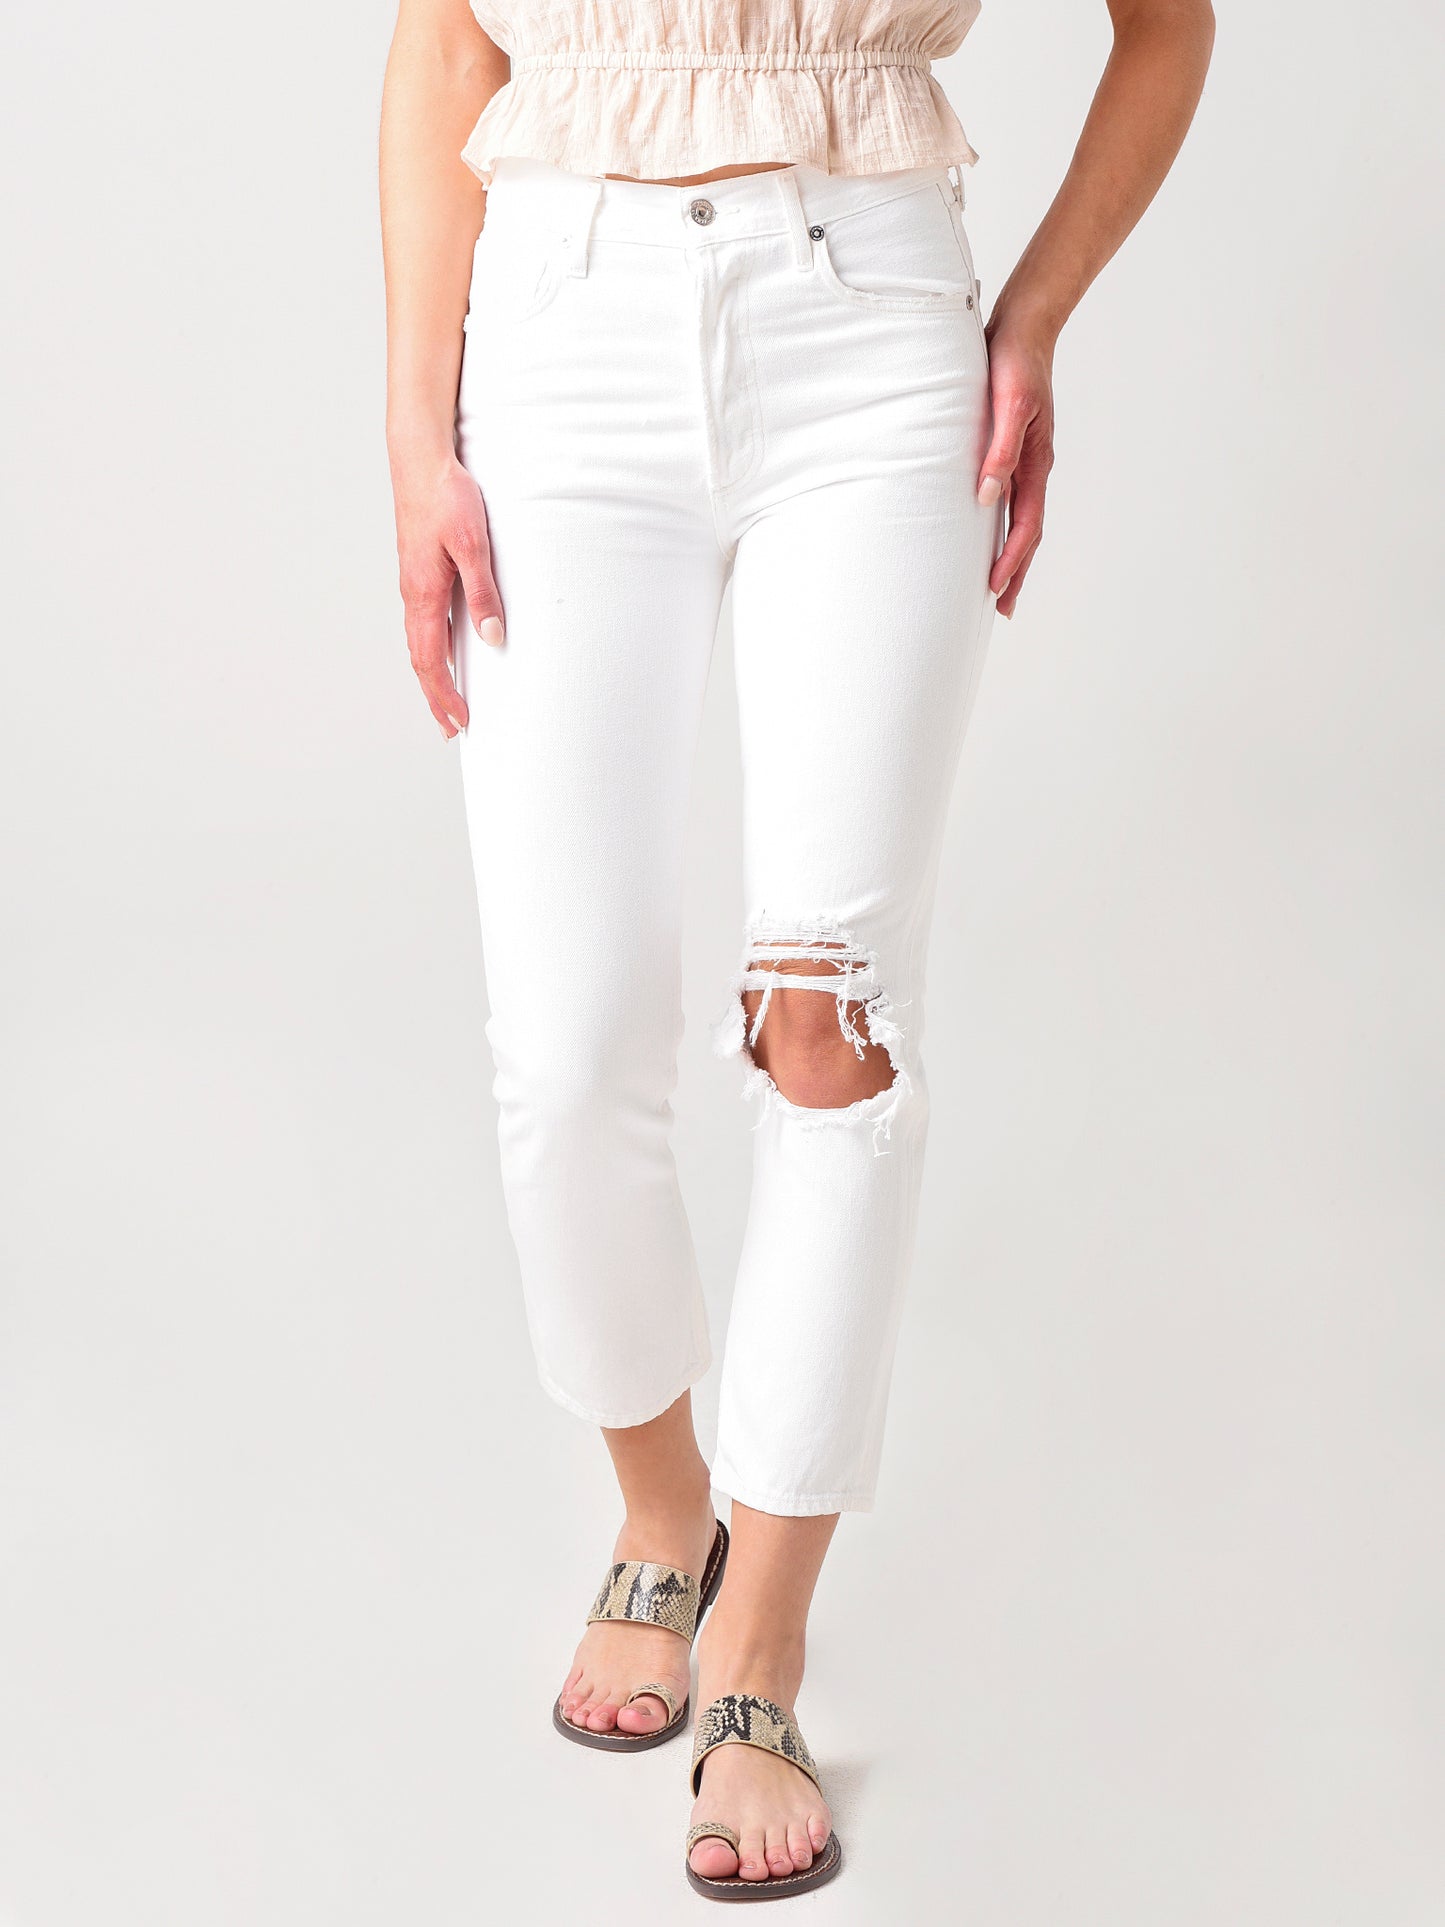 Citizens Of Humanity Women's Charlotte Crop High-Rise Straight Jean